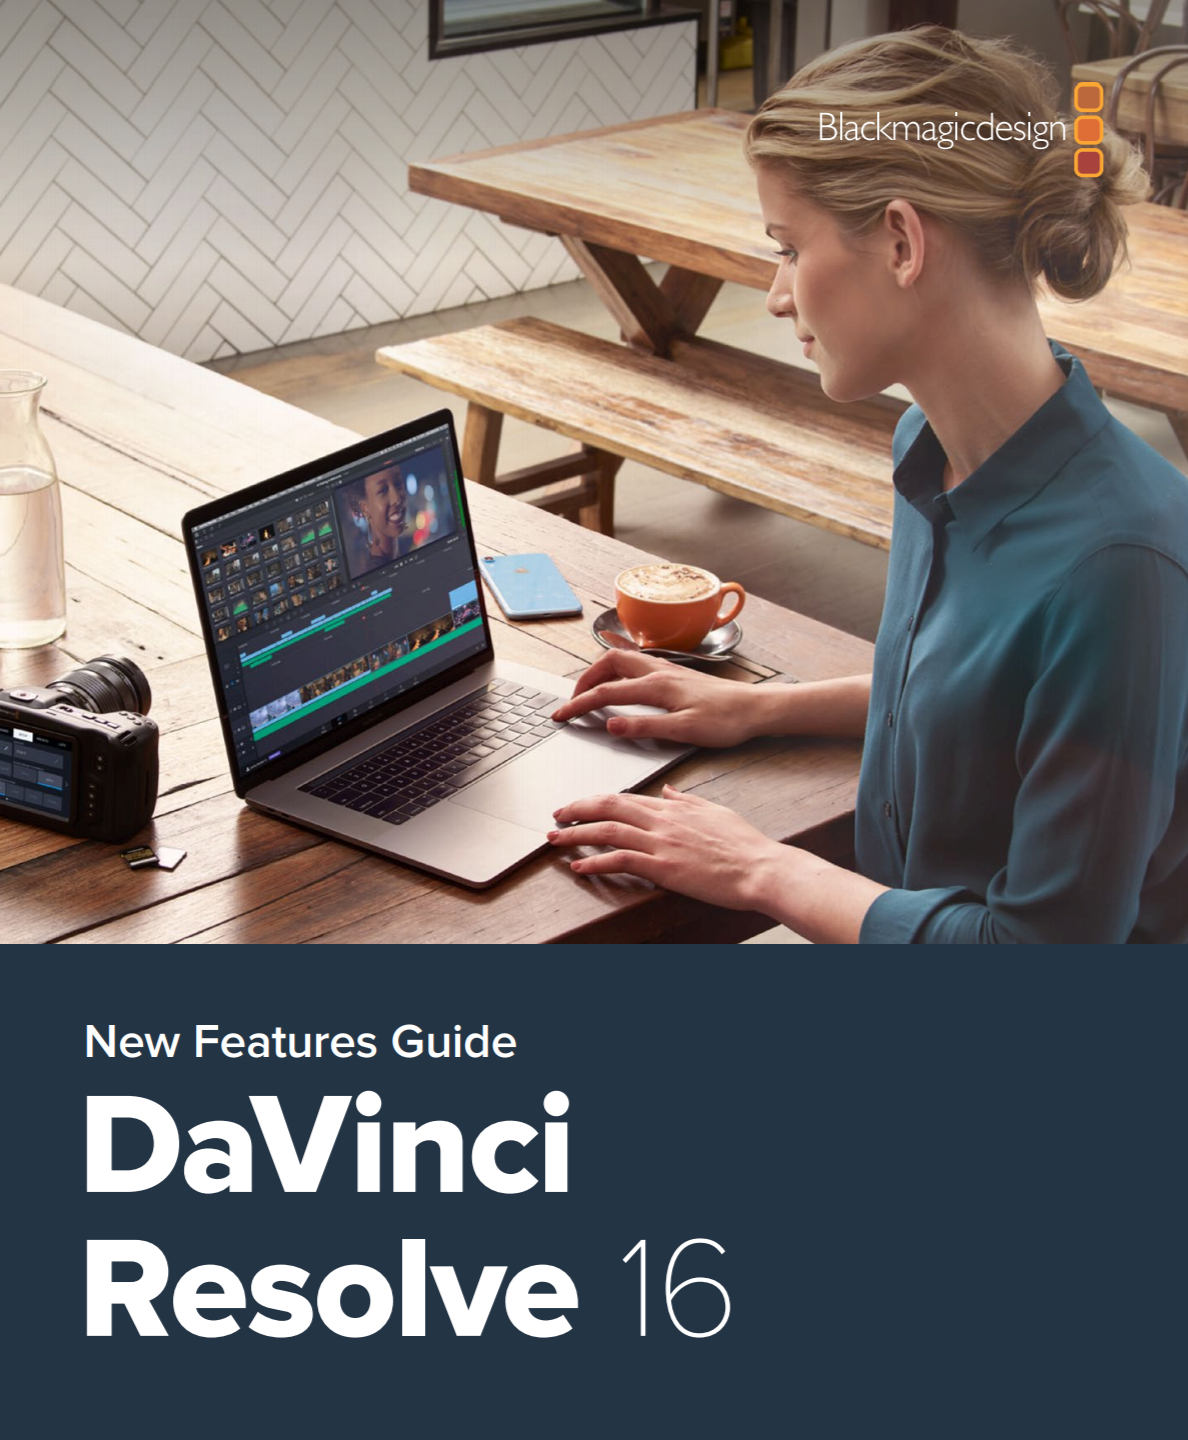 the New Features Guide for DaVinci Resolve 16